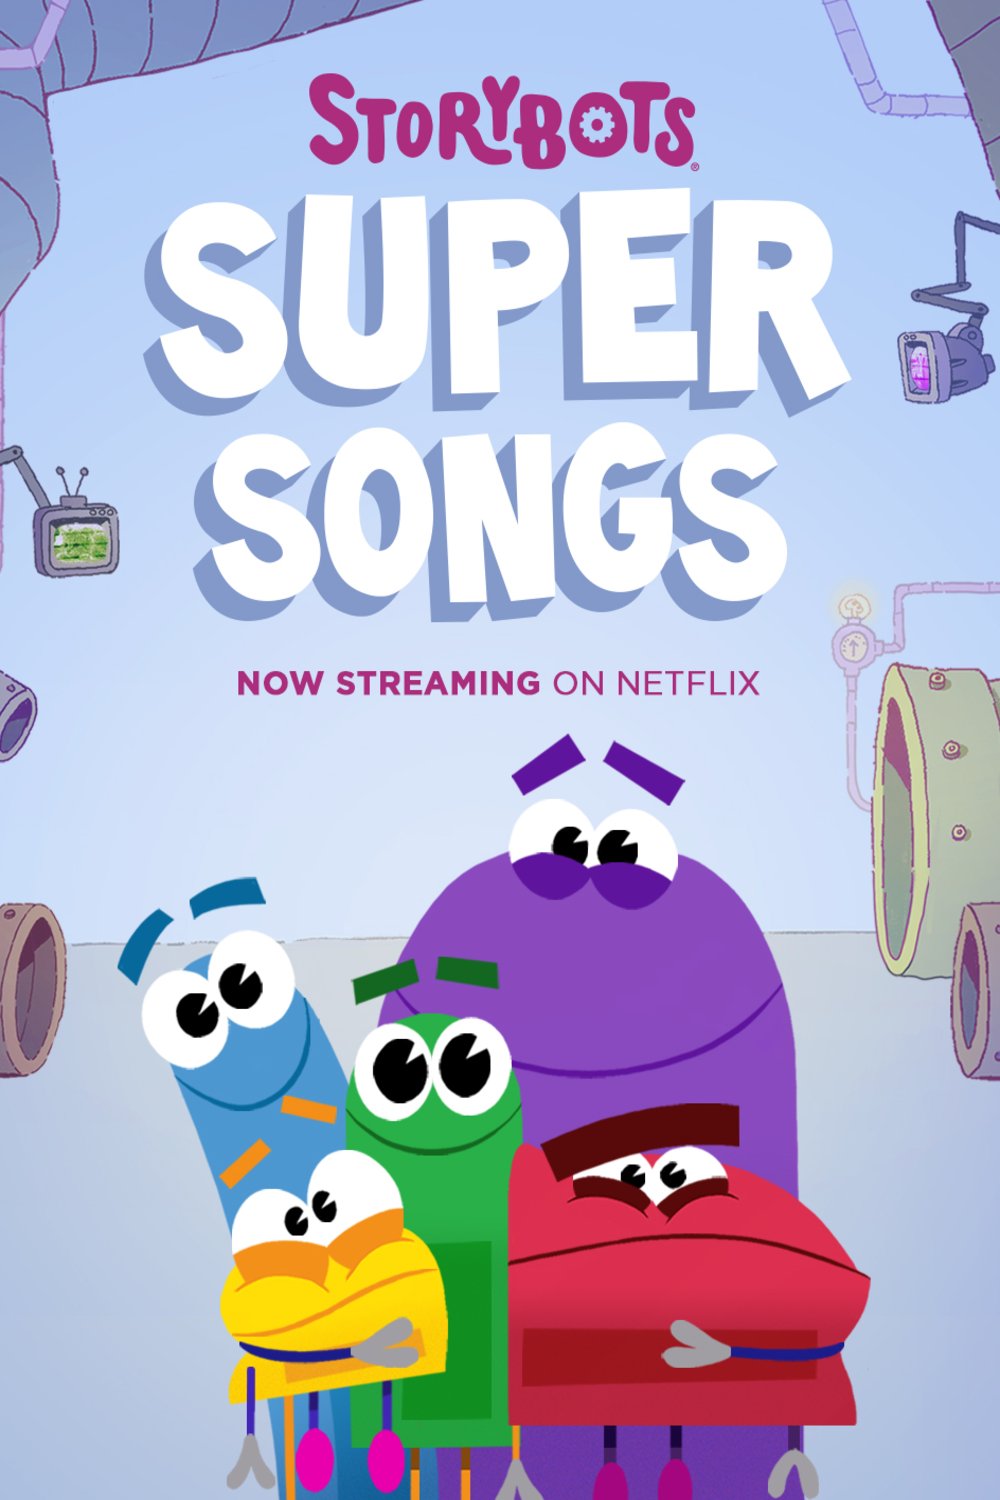 Poster of the movie StoryBots Super Songs